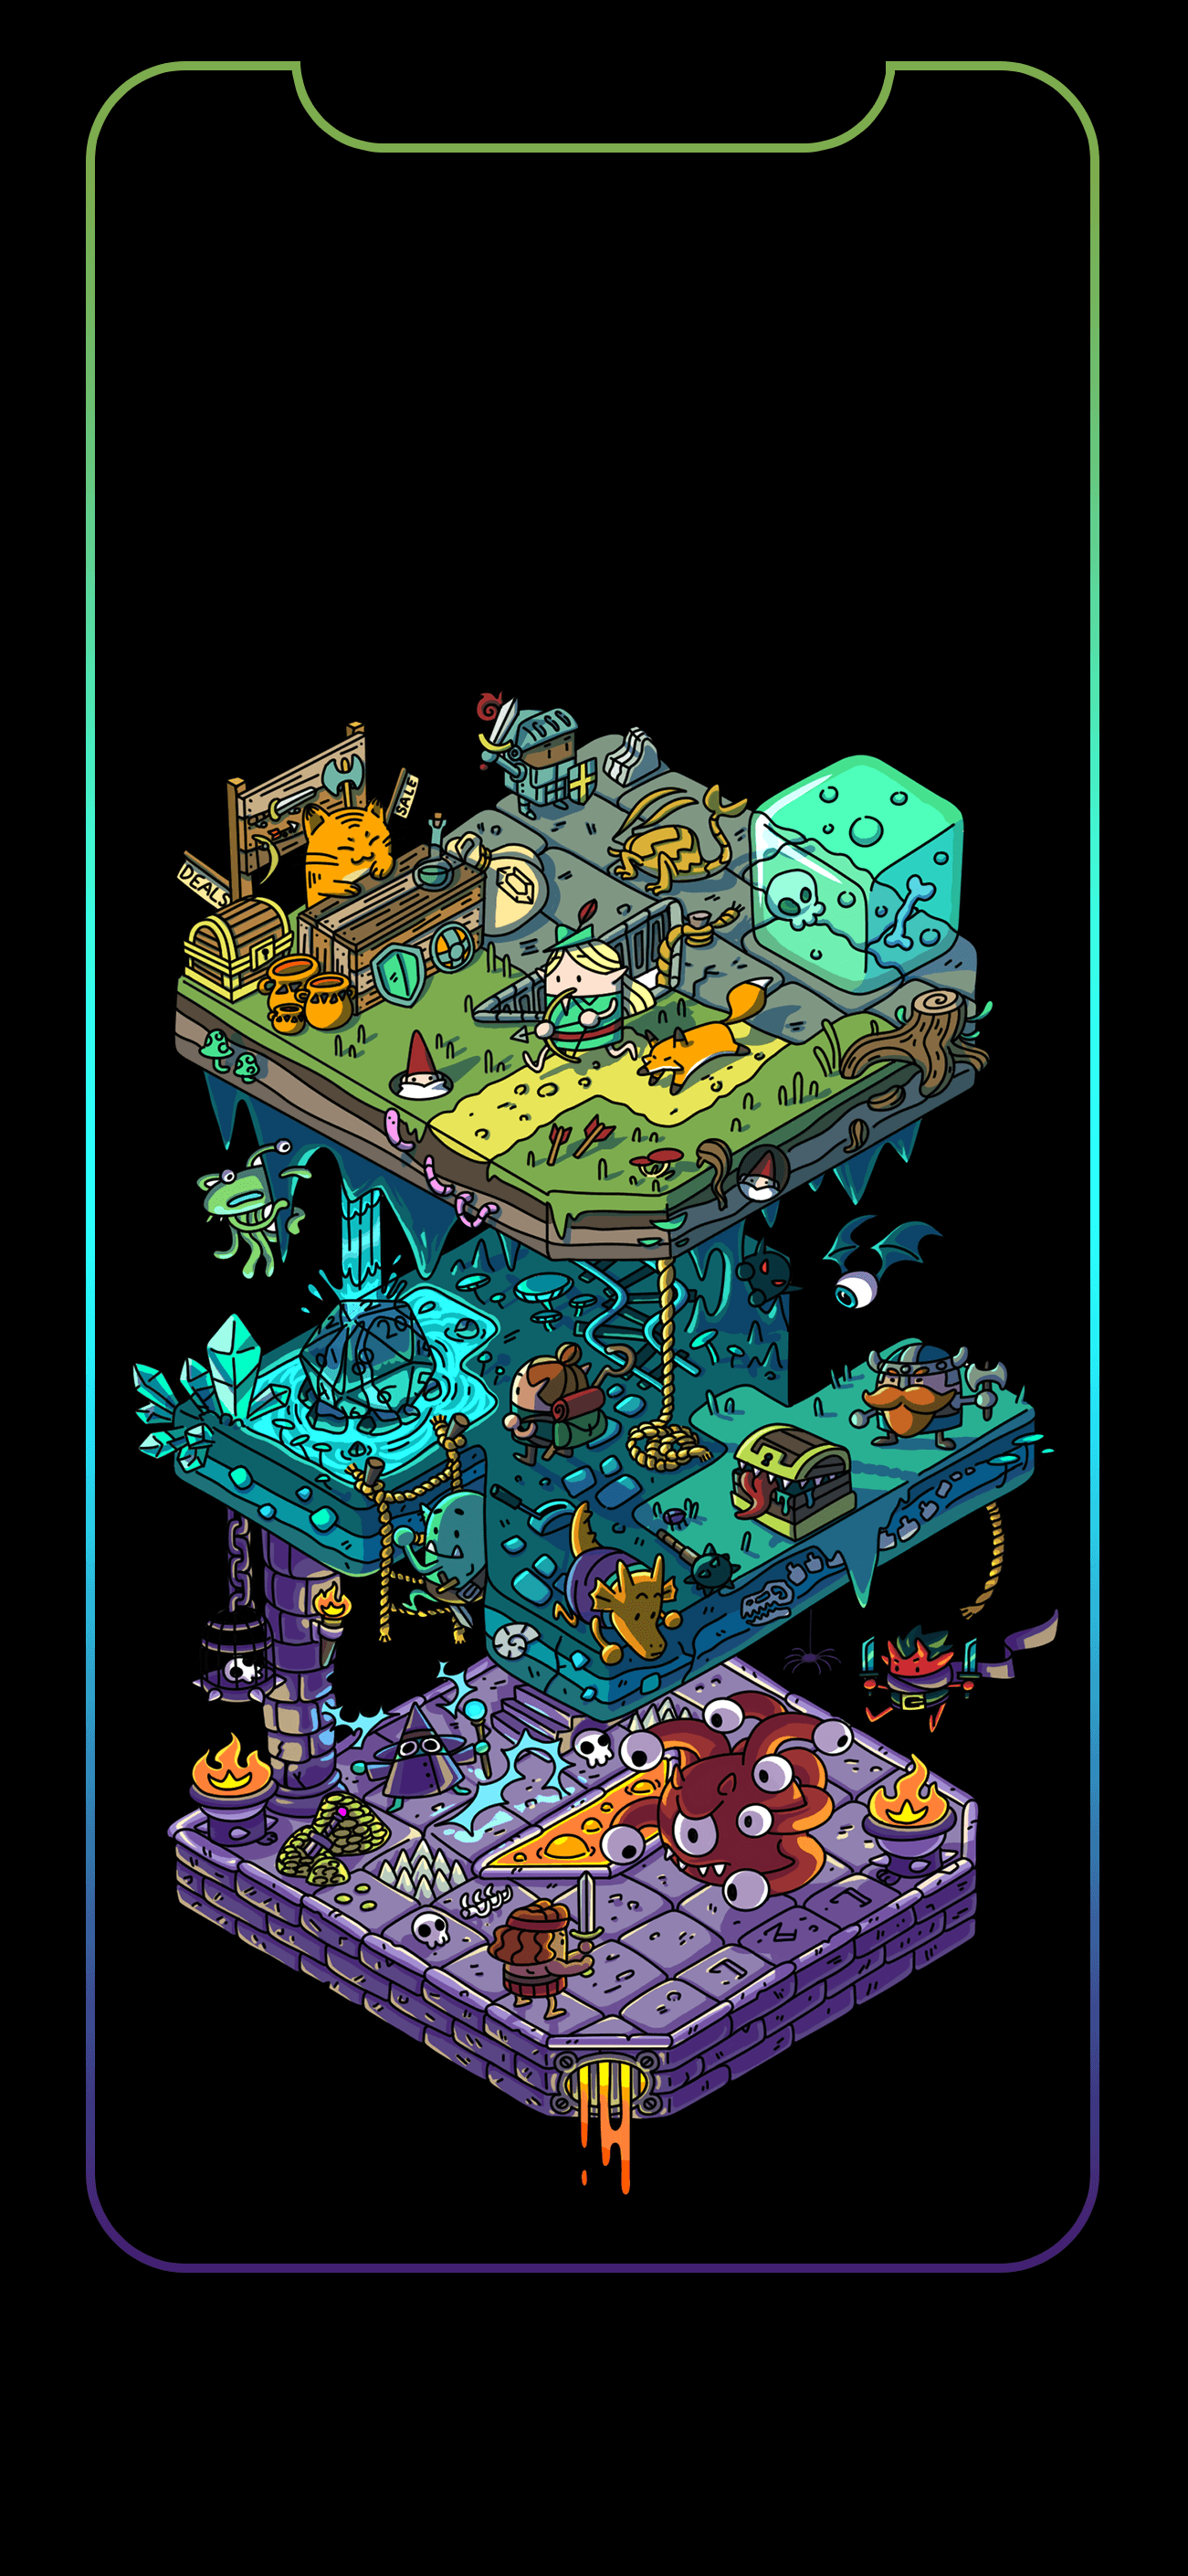 iPhone X Wallpaper based on the isometric DND art by /u